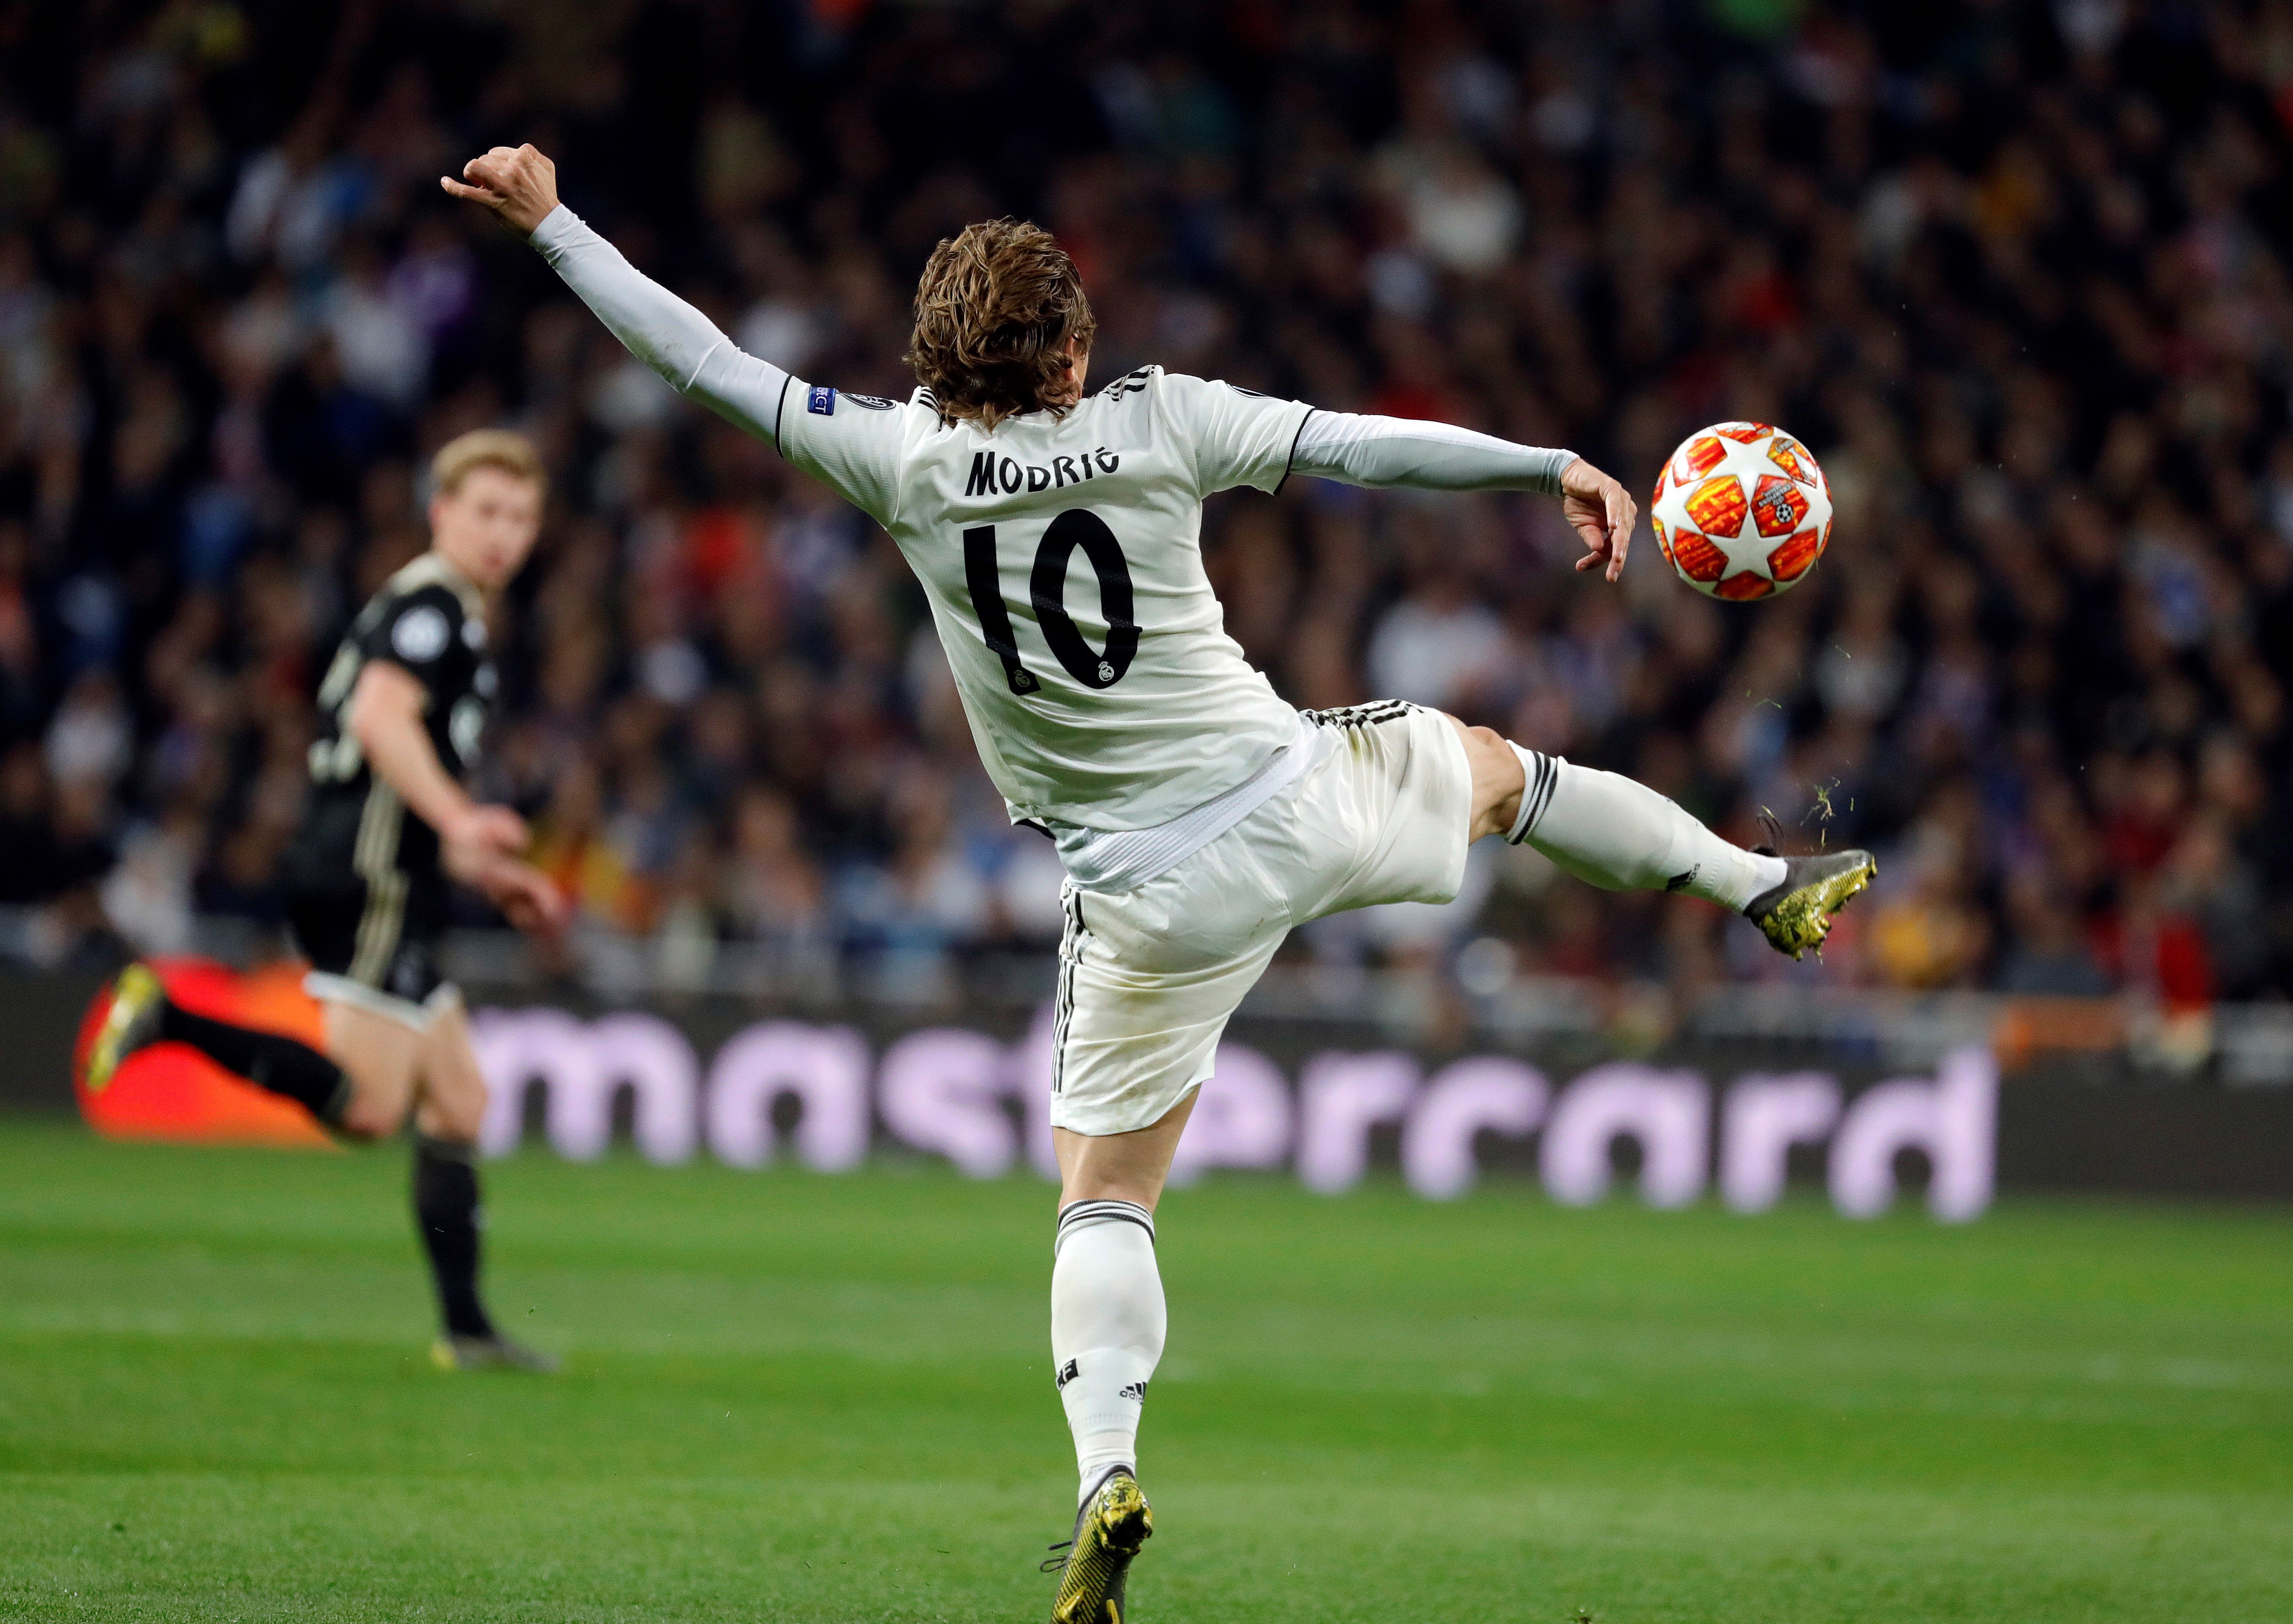 epa07416006 Real Madrid's Luka Modric in action during the UEFA Champions League round of 16 second leg match between Real Madrid and Ajax at the Santiago Bernabeu stadium in Madrid, Spain, 05 March 2019.  EPA/JUANJO MARTIN